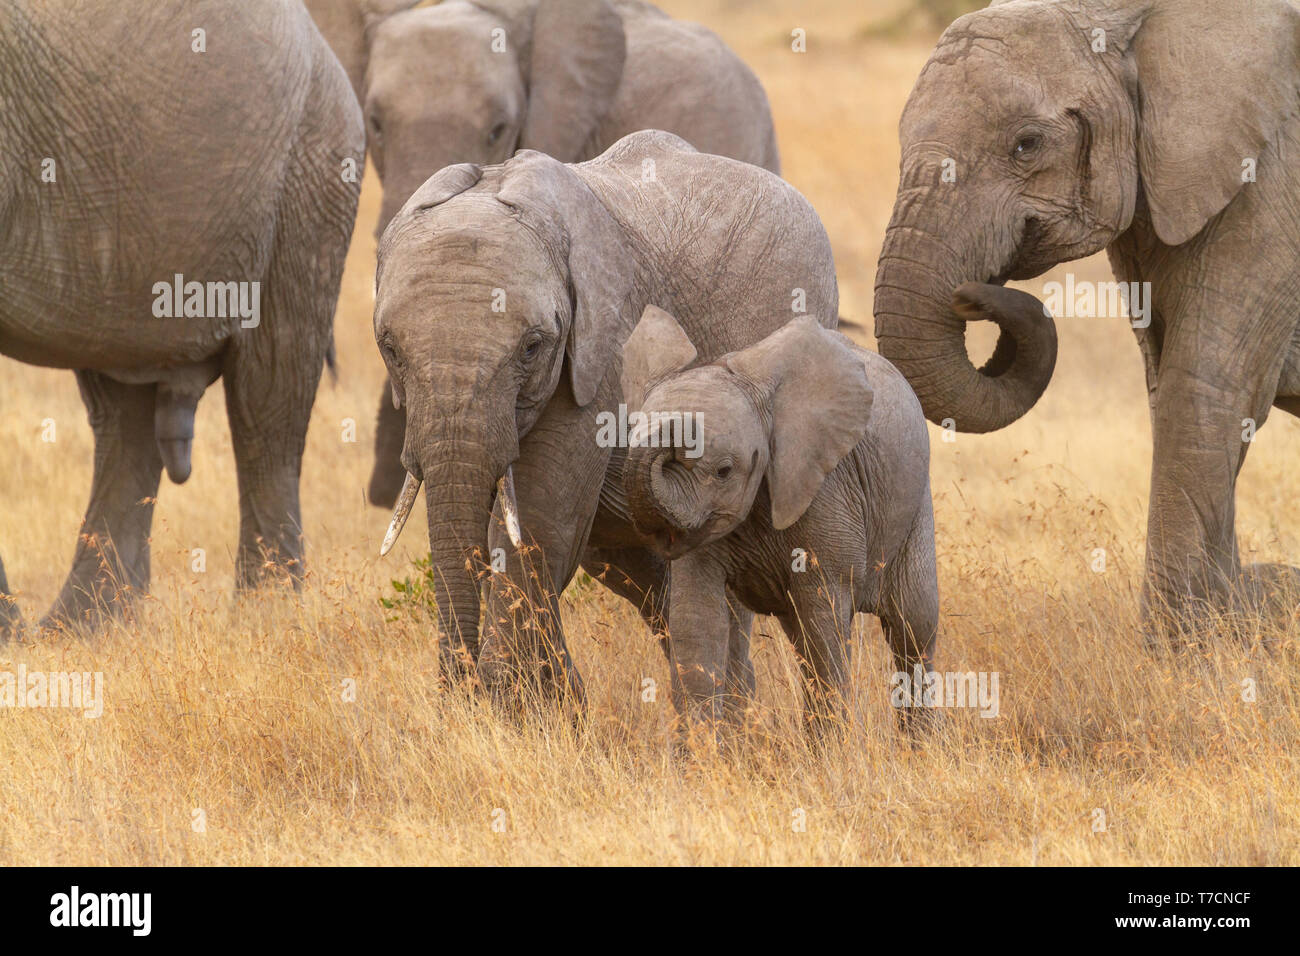 Two cute baby elephant calves Loxodonta africana playing happily in dry golden grass Ol Pejeta Conservancy Kenya East Africa temporal gland streaming Stock Photo